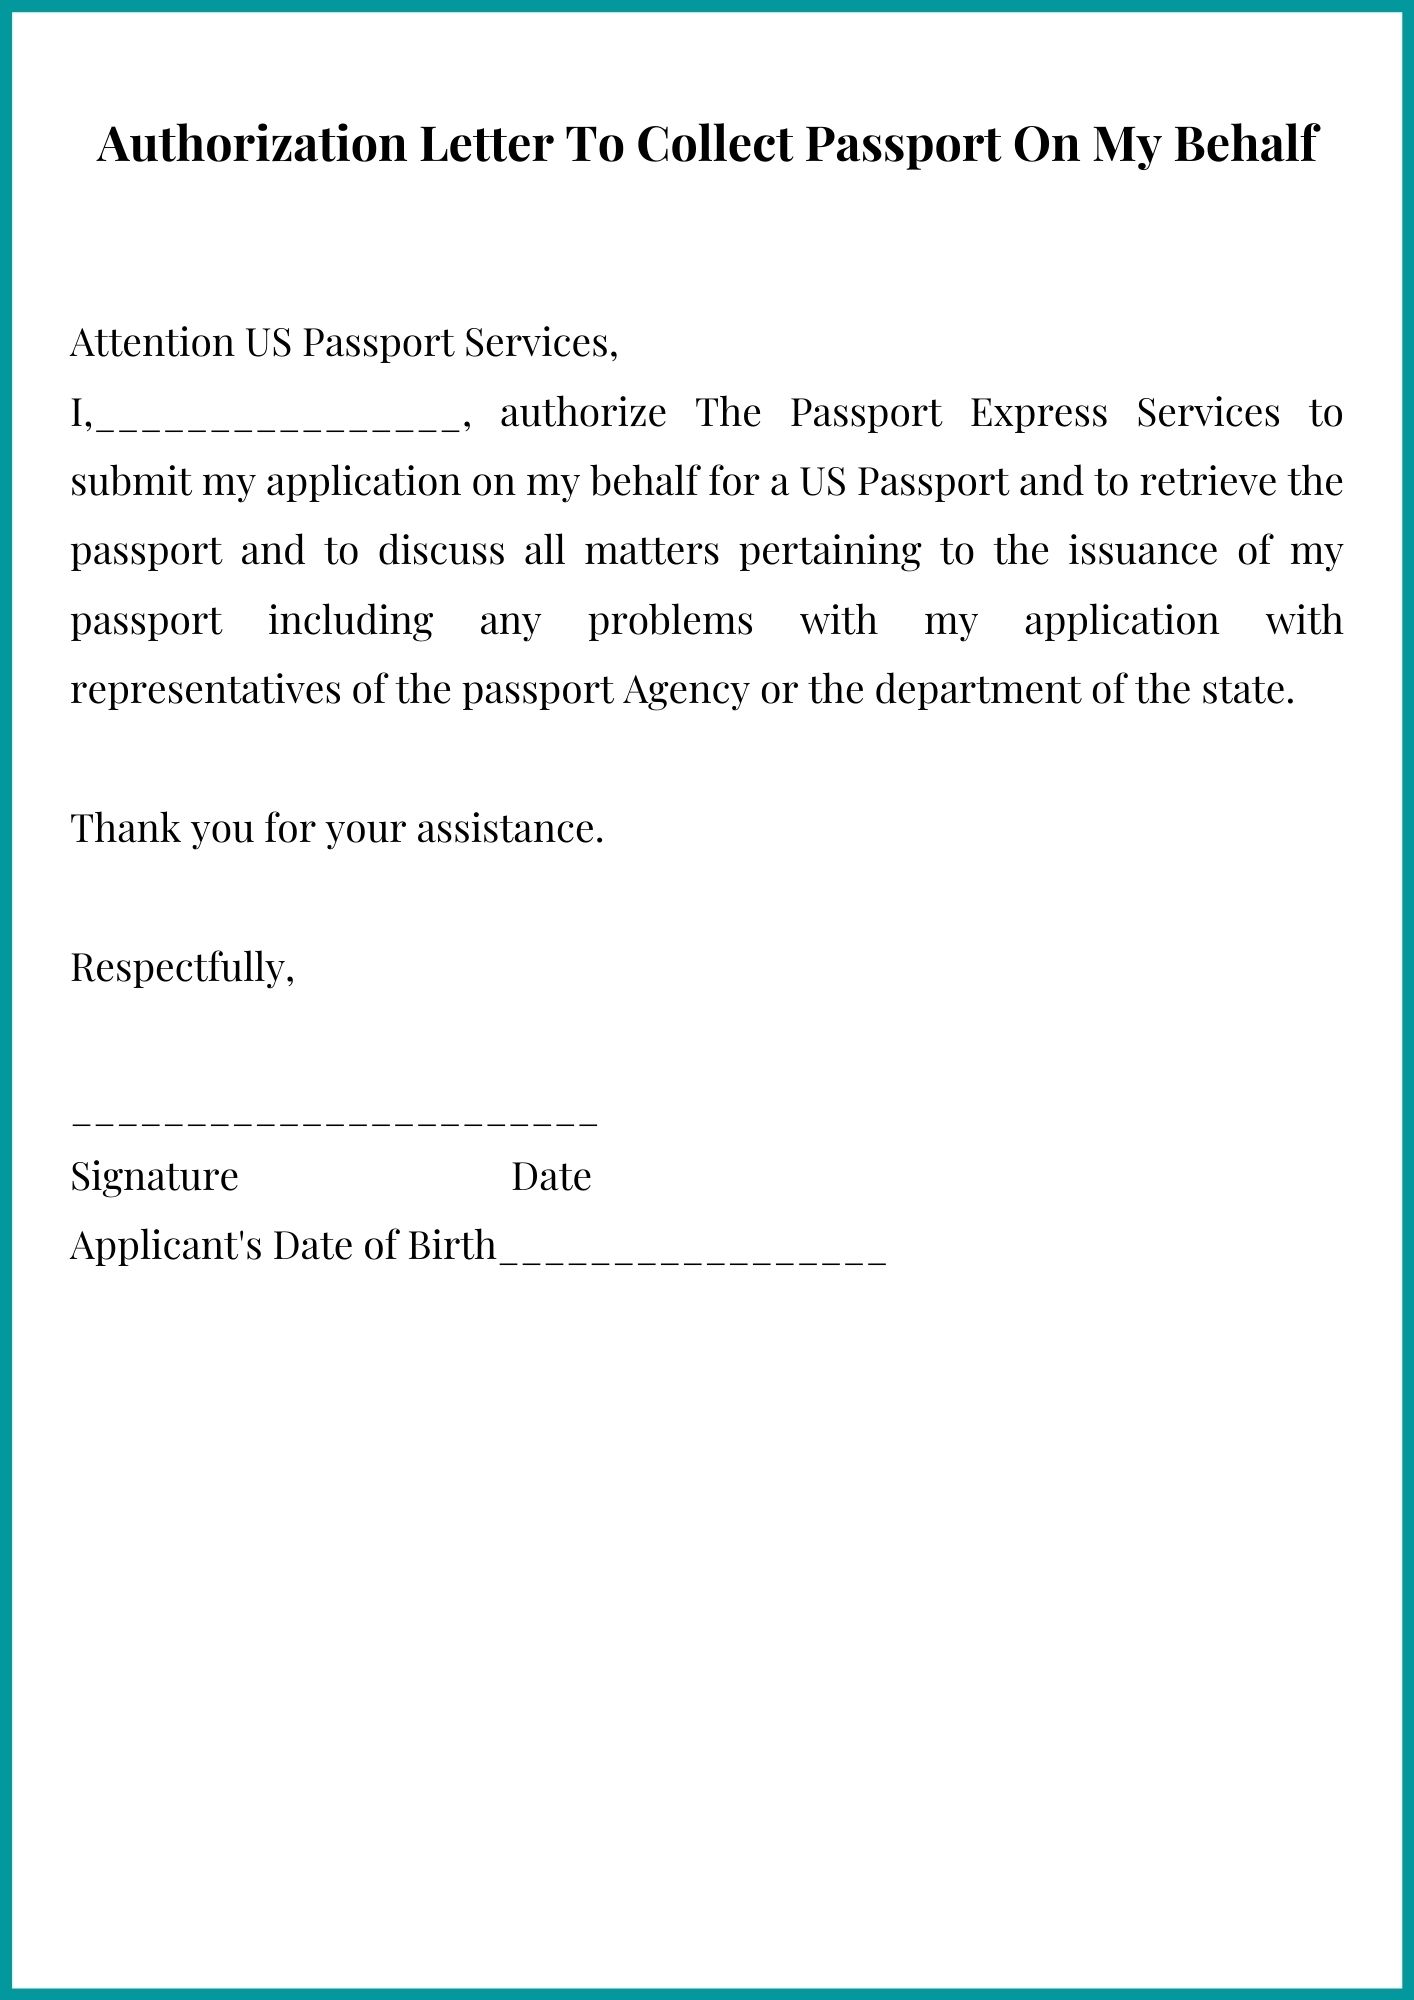 how to write application letter for passport renewal